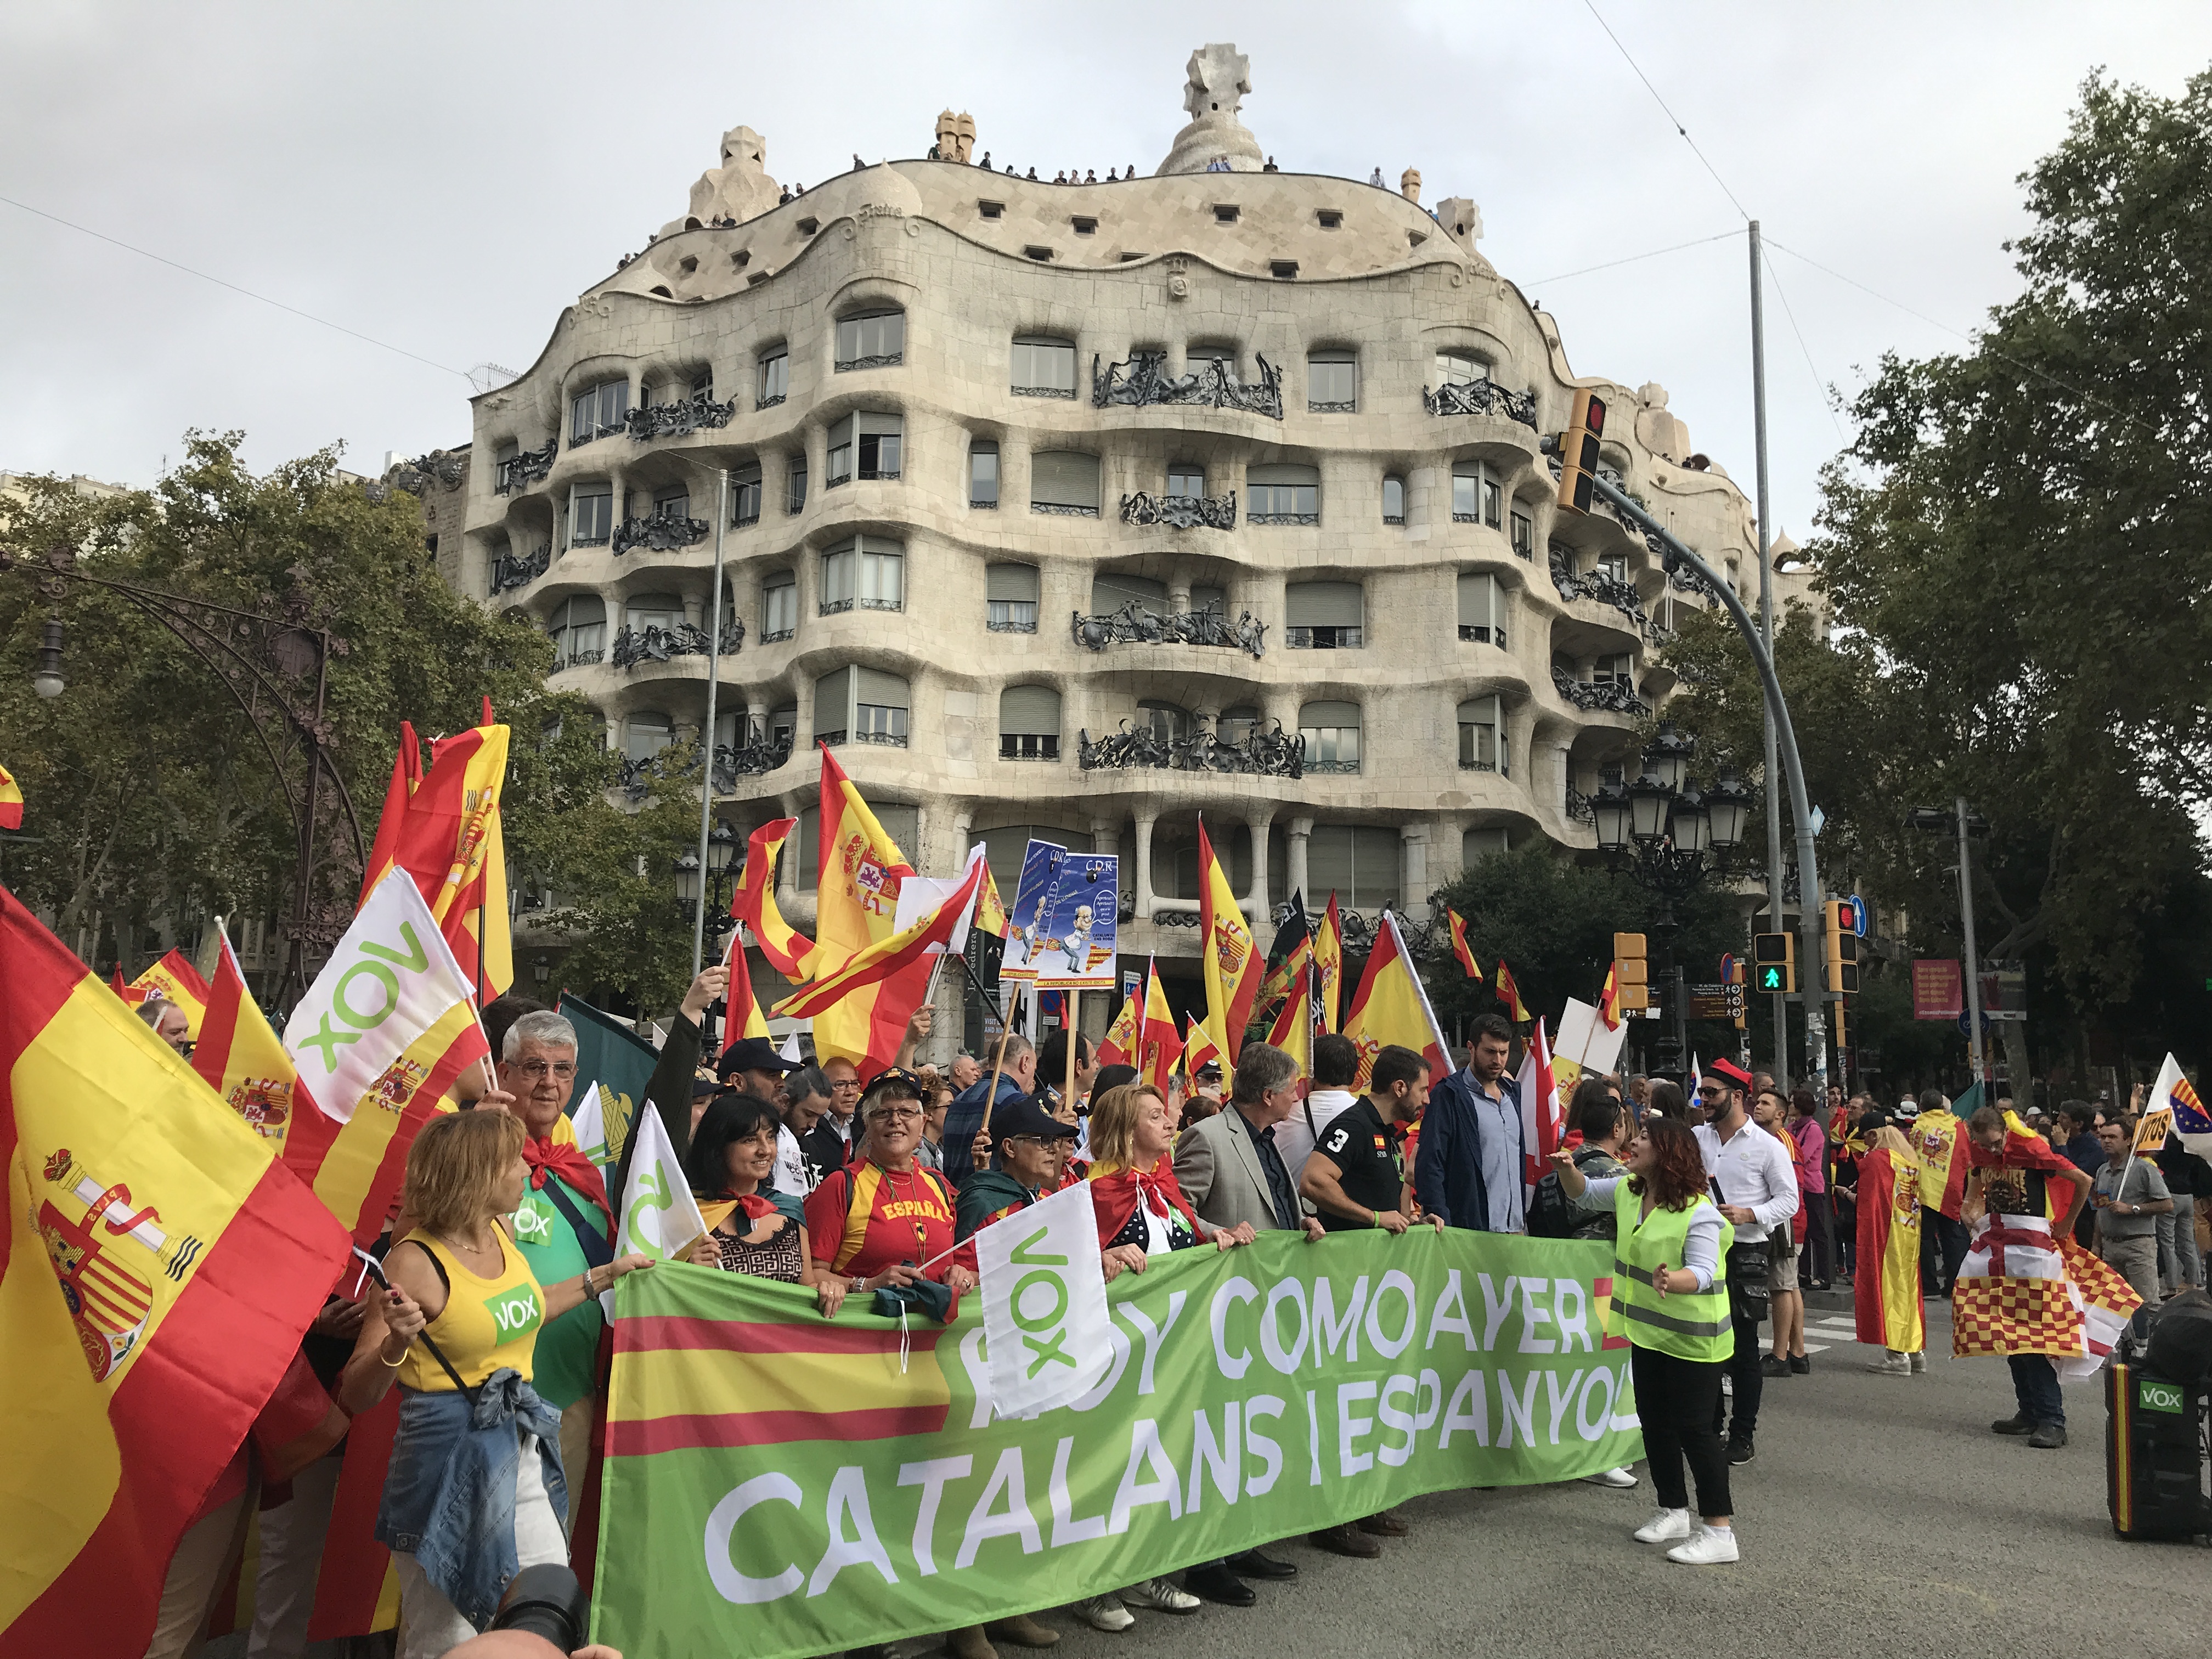 Far-right Vox supporters at Spain's 2019 National Day rally in Barcelona (by Cristina Tomàs White)